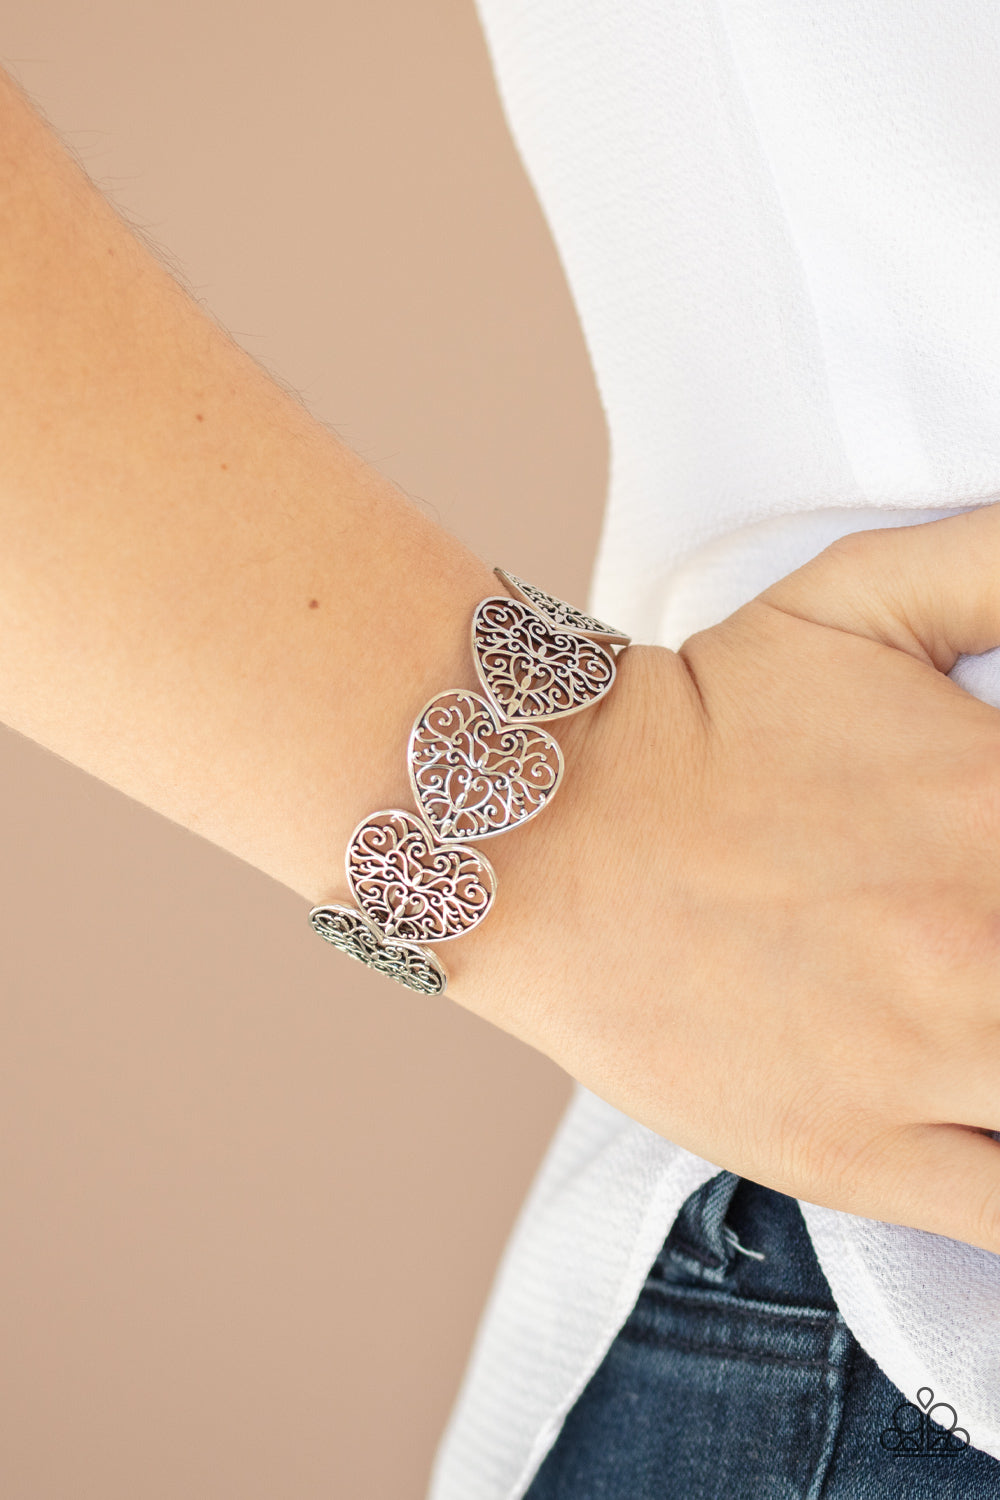 Keep Love In Your Heart - Silver Filigree Heart Stretchy Bracelet - Paparazzi Accessories